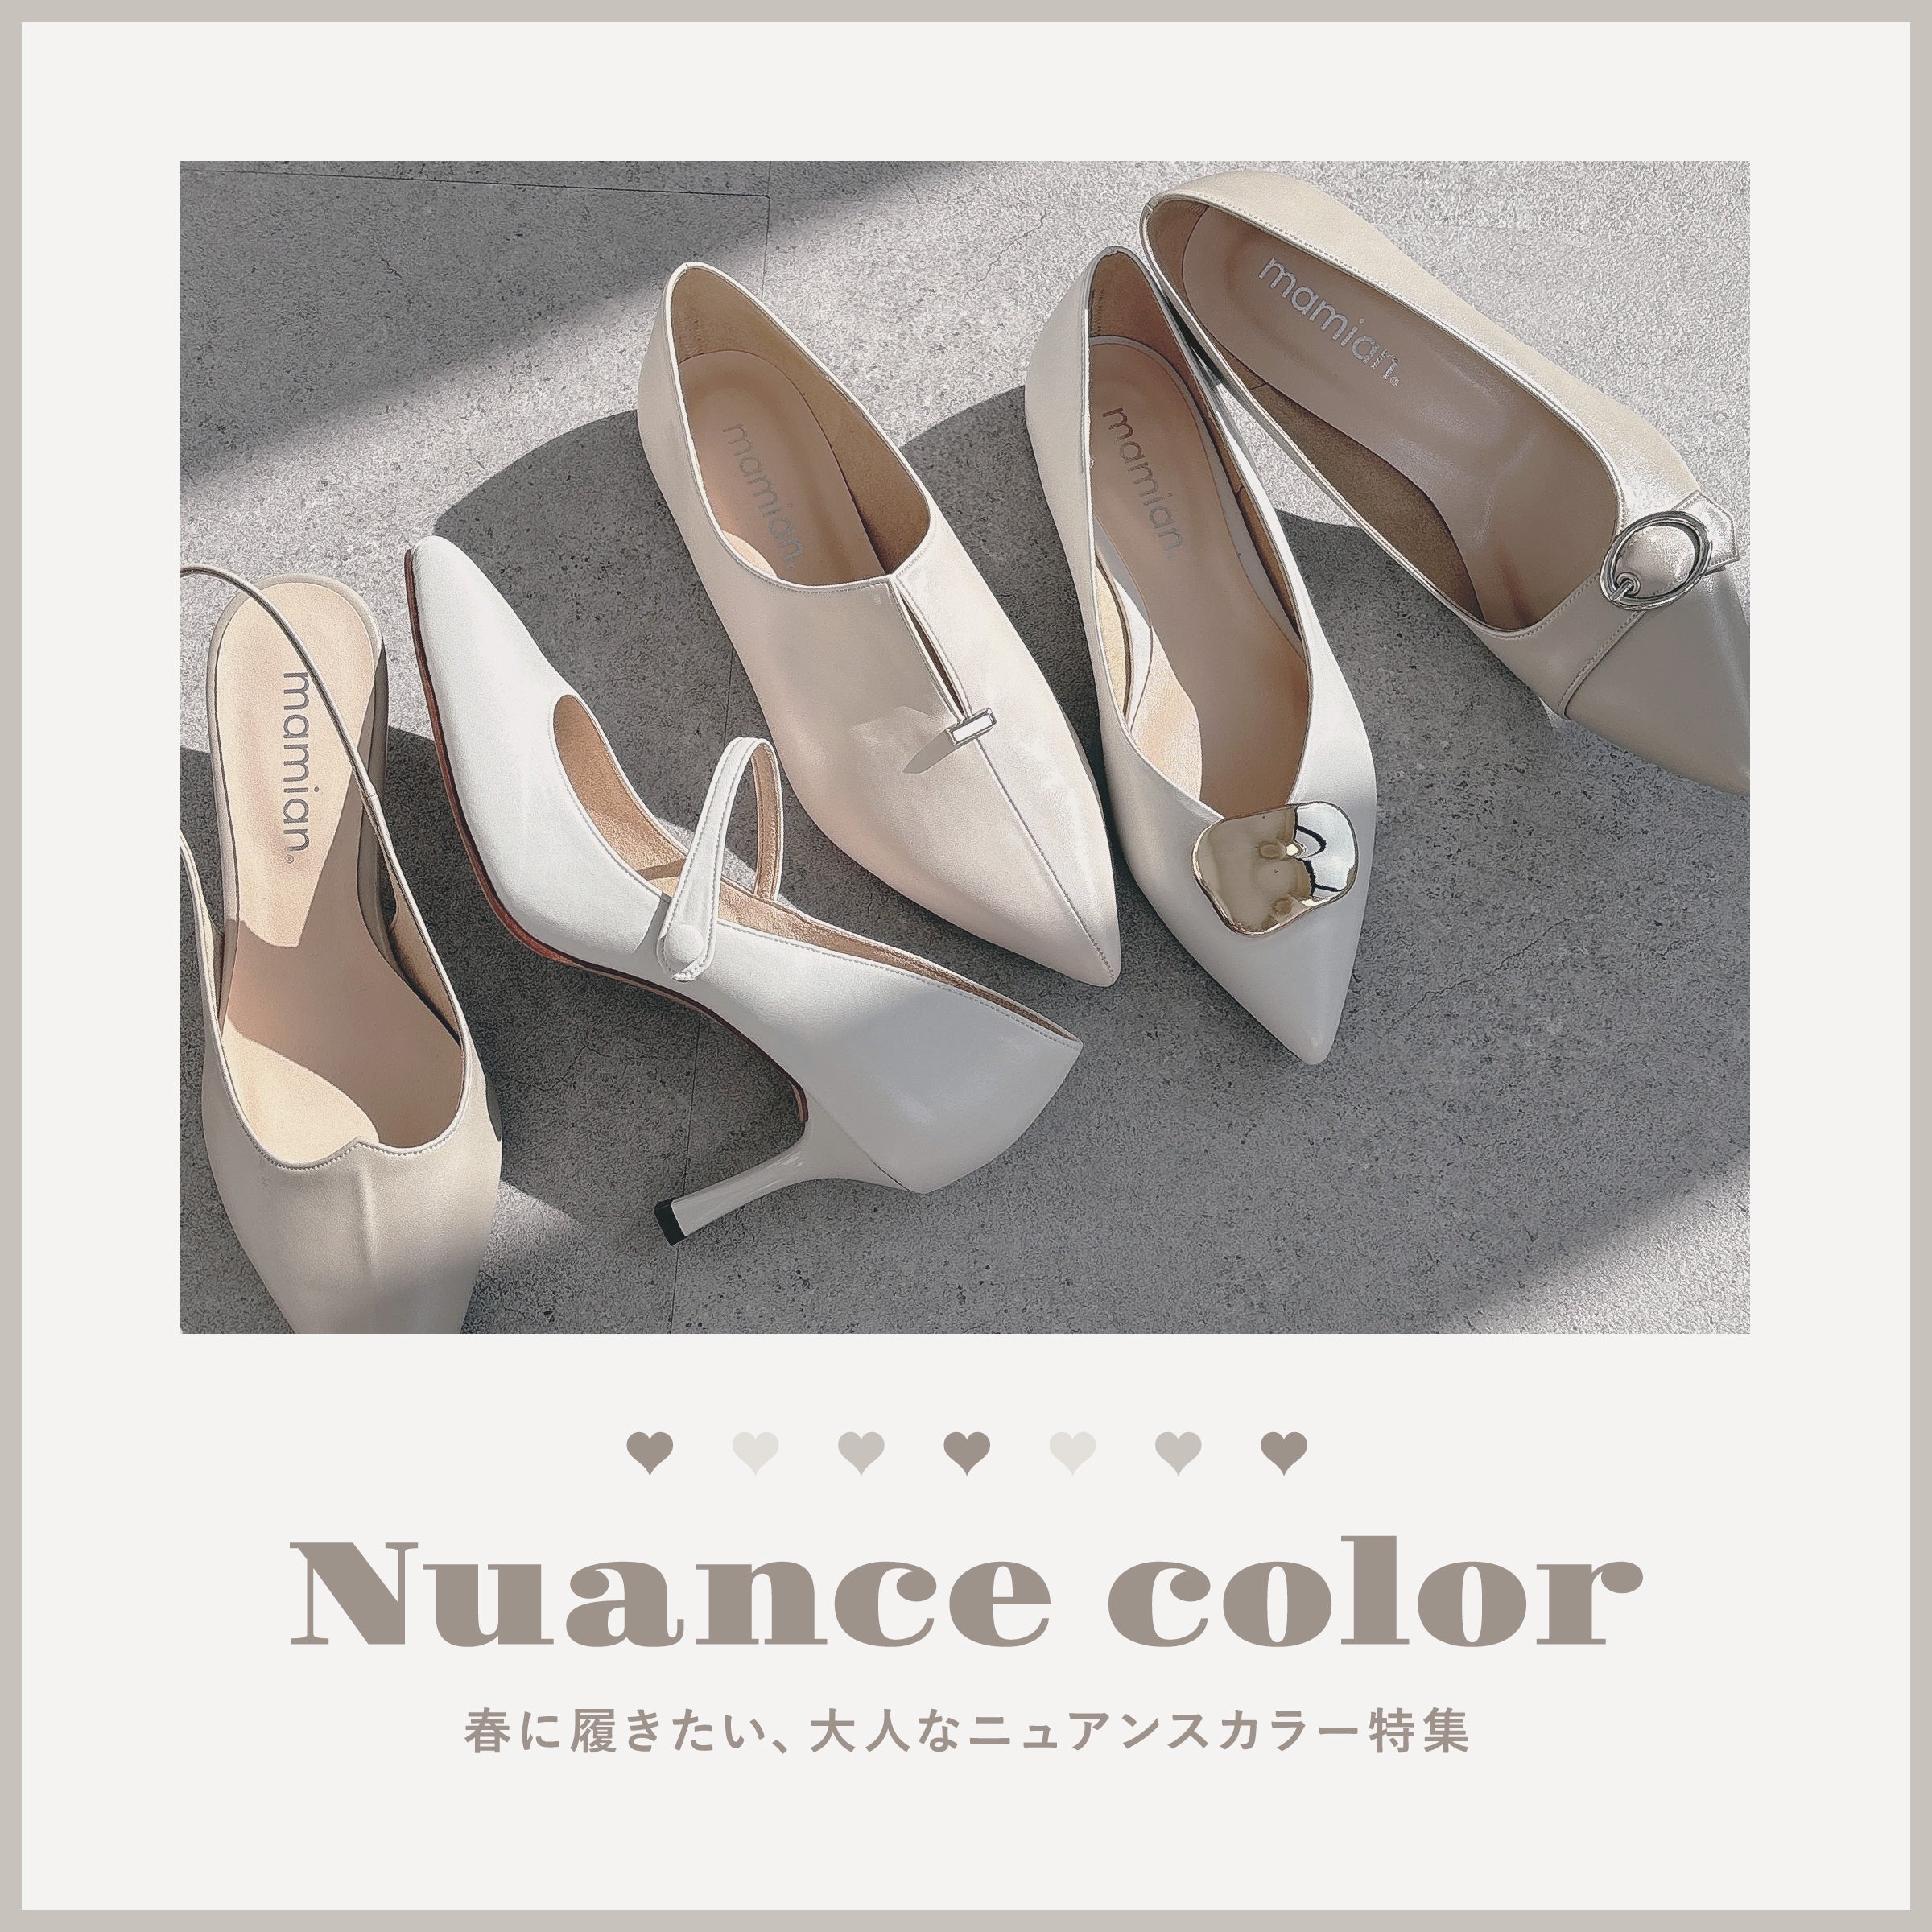 I want to wear it in spring! Adult nuance color special feature